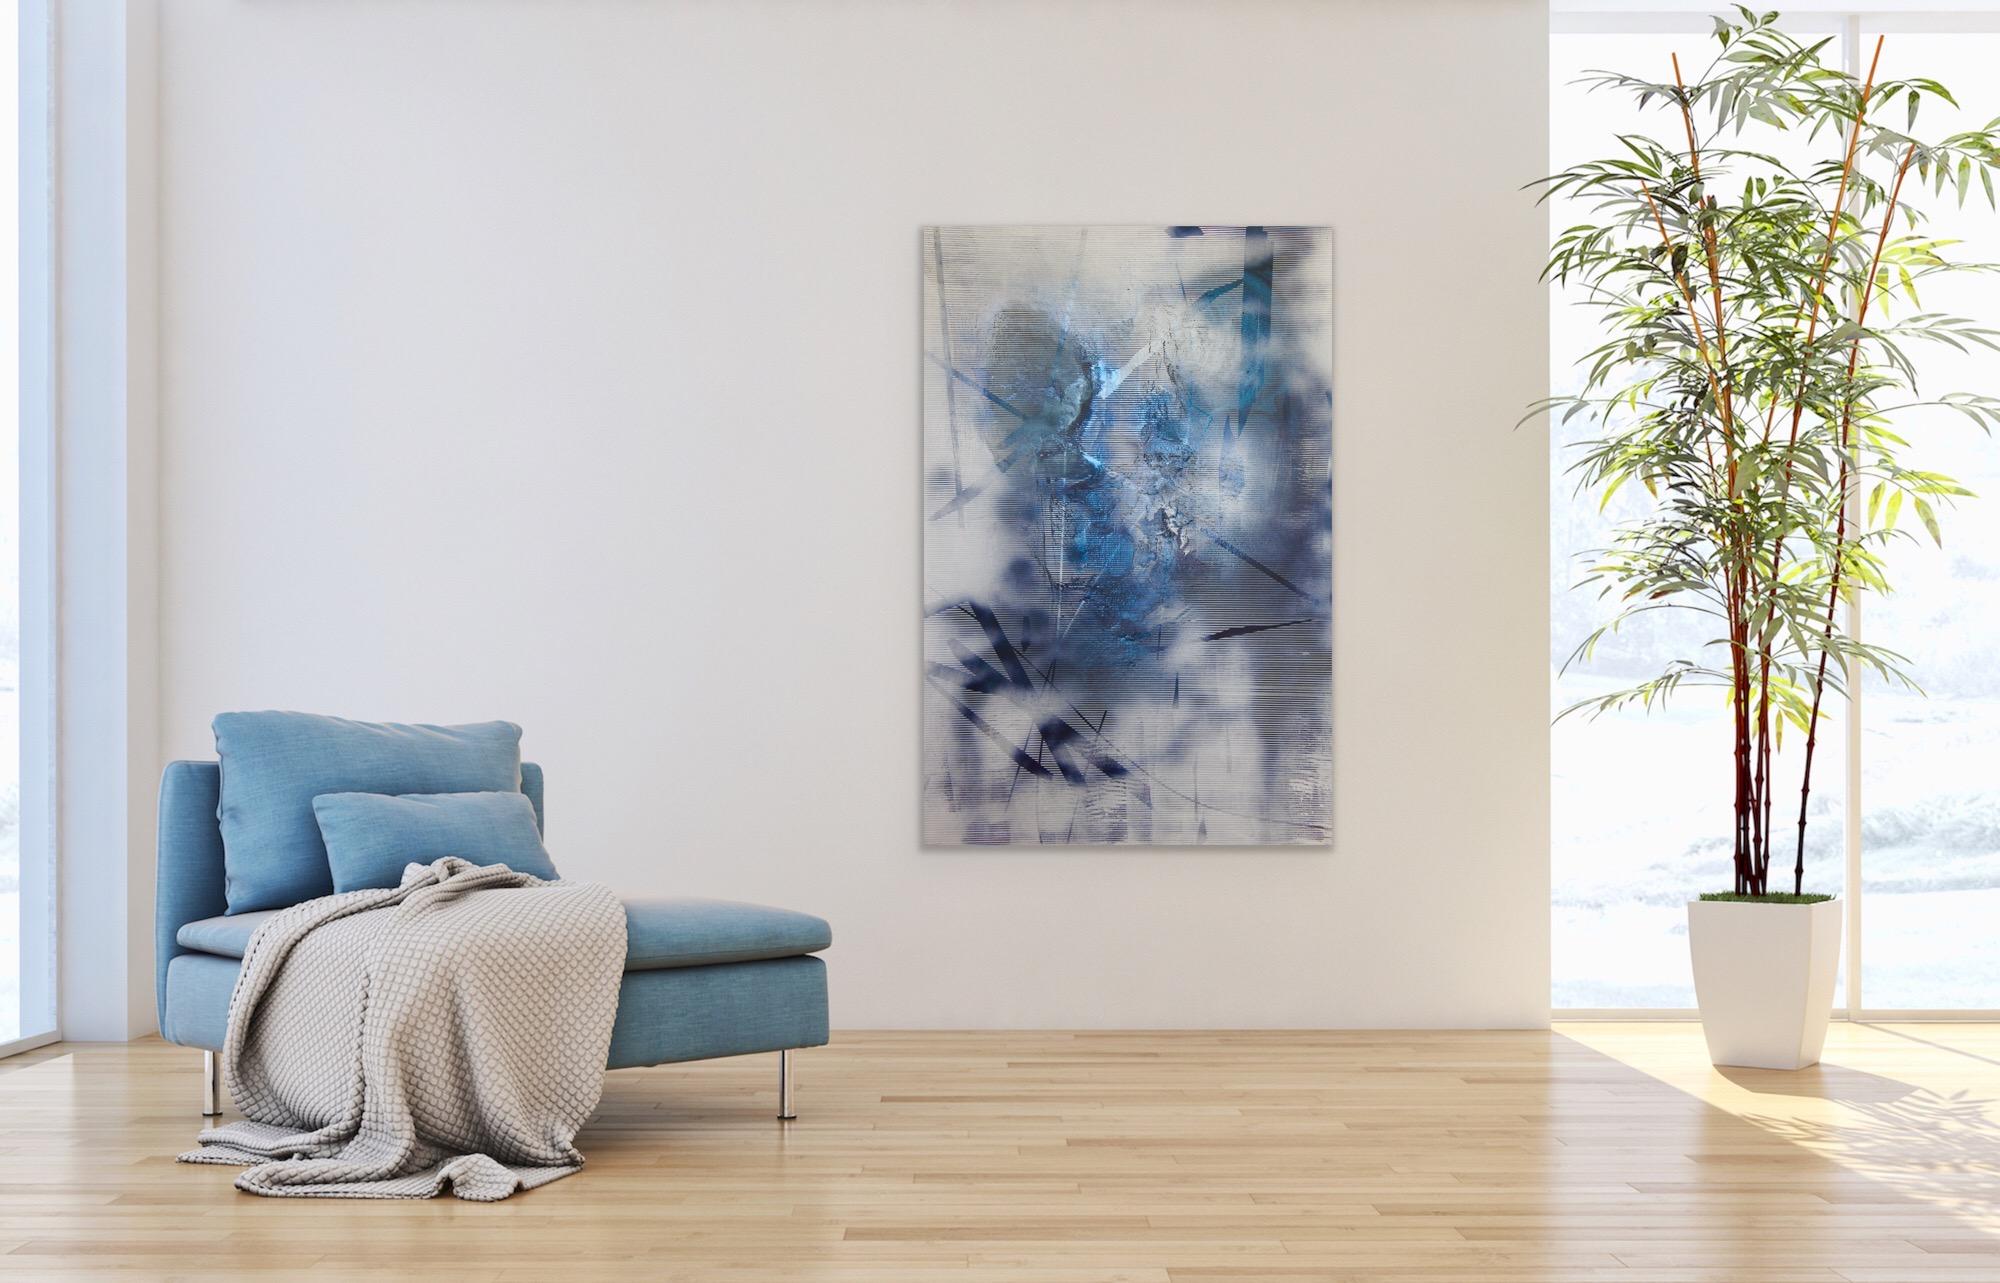 Screen tbd4 (abstract grid painting contemporary blue white atmospheric art) - Painting by Melisa Taylor Metzger